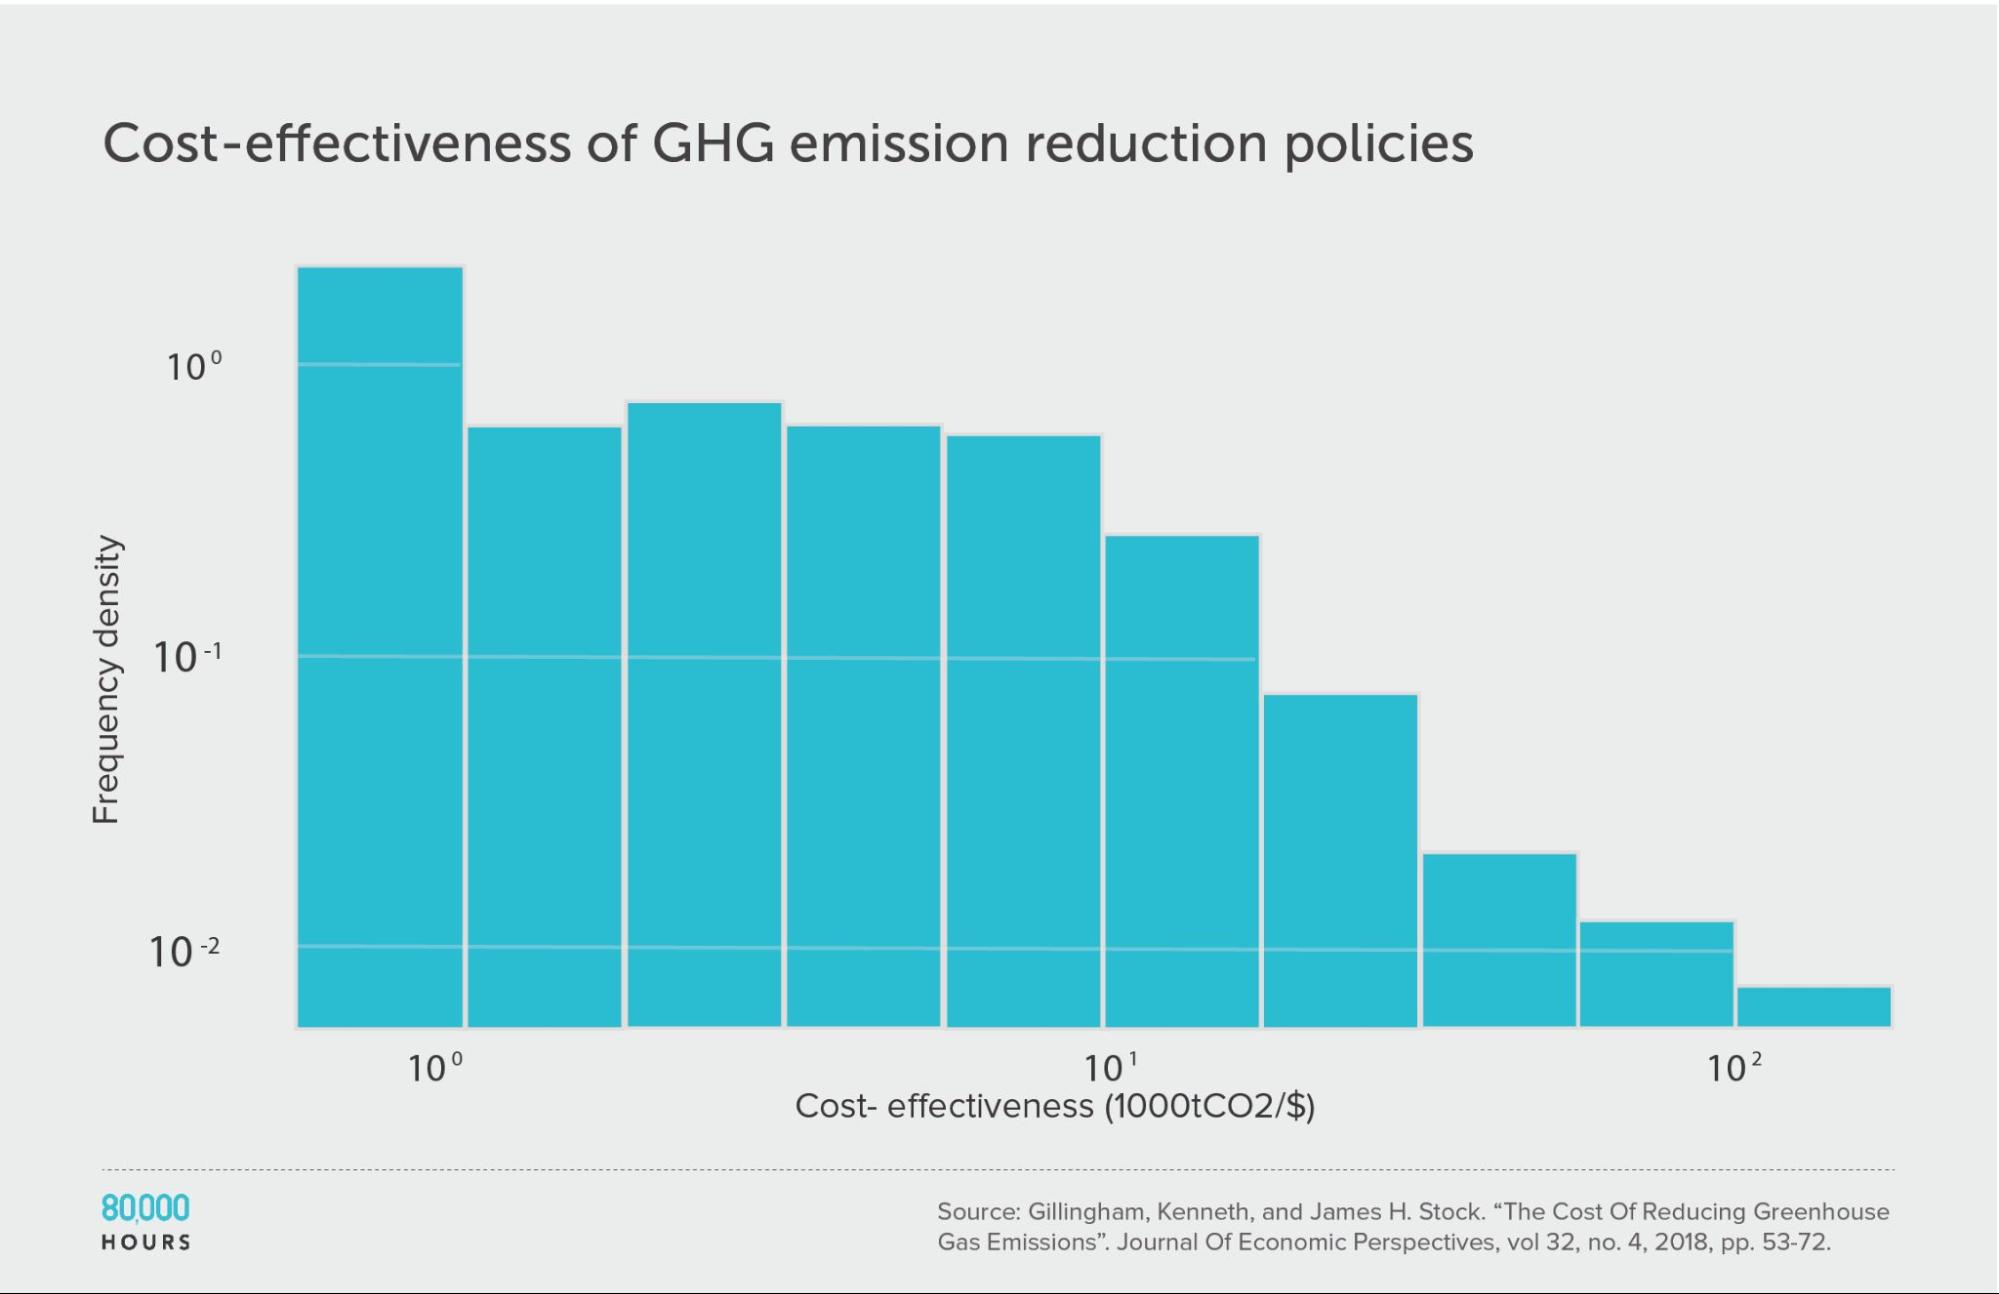 Logarithmic binned histogram of the cost effectiveness of interventions to reduce greenhouse gas emissions, according to data from Gillingham and Stock